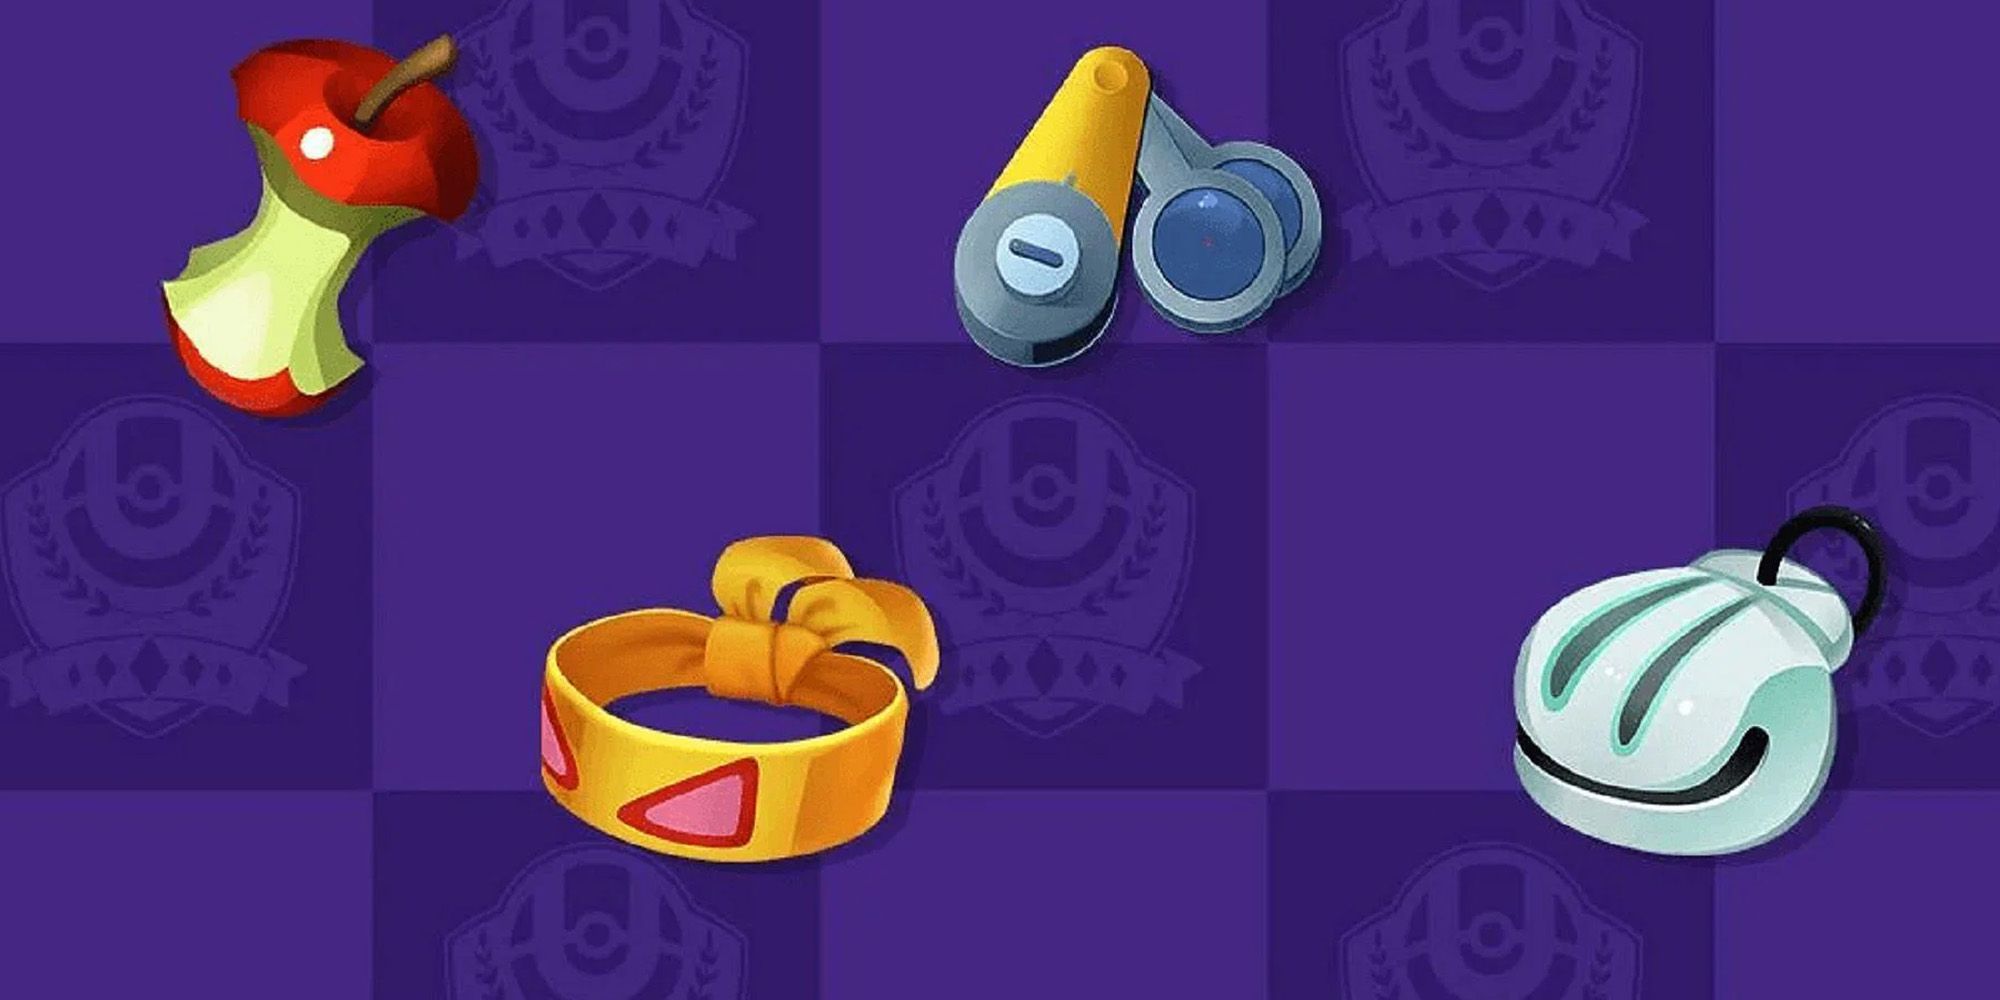 Leftovers scope lens, muscle band and Shell Bell on a purple background